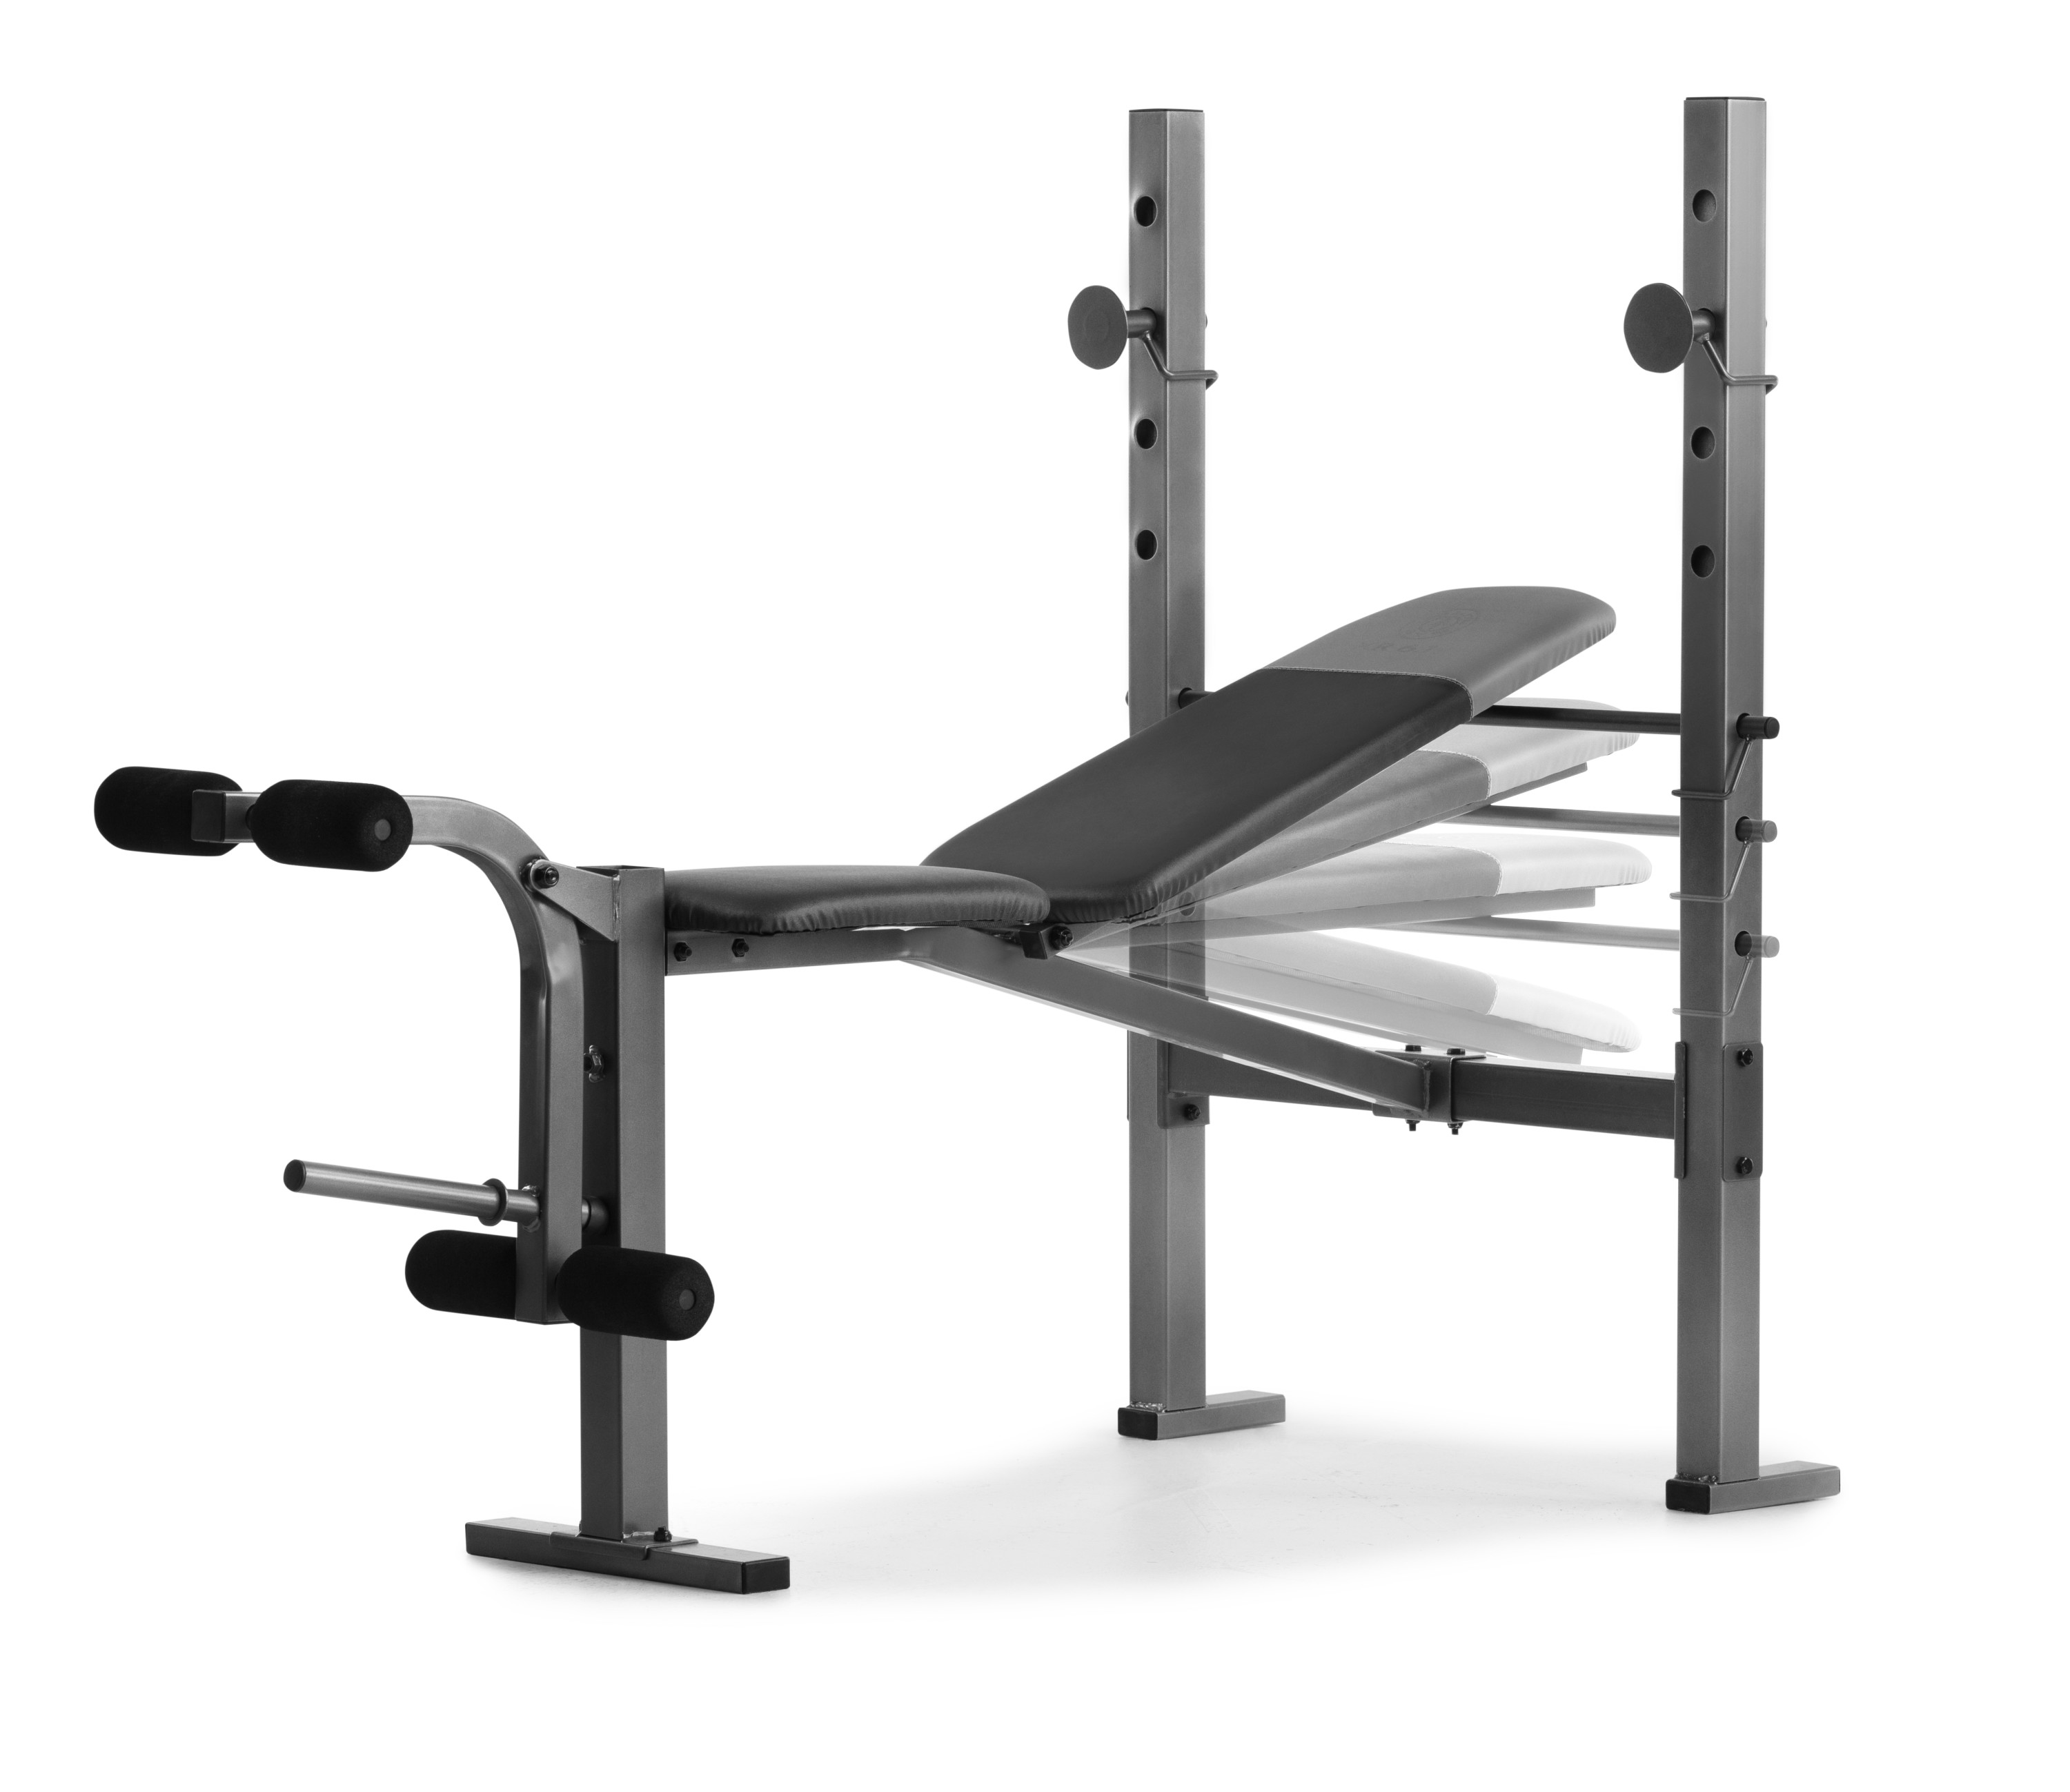 Weider XR 6.1 Adjustable Weight Bench with Leg Developer, 410 lb. Weight Limit - image 6 of 12